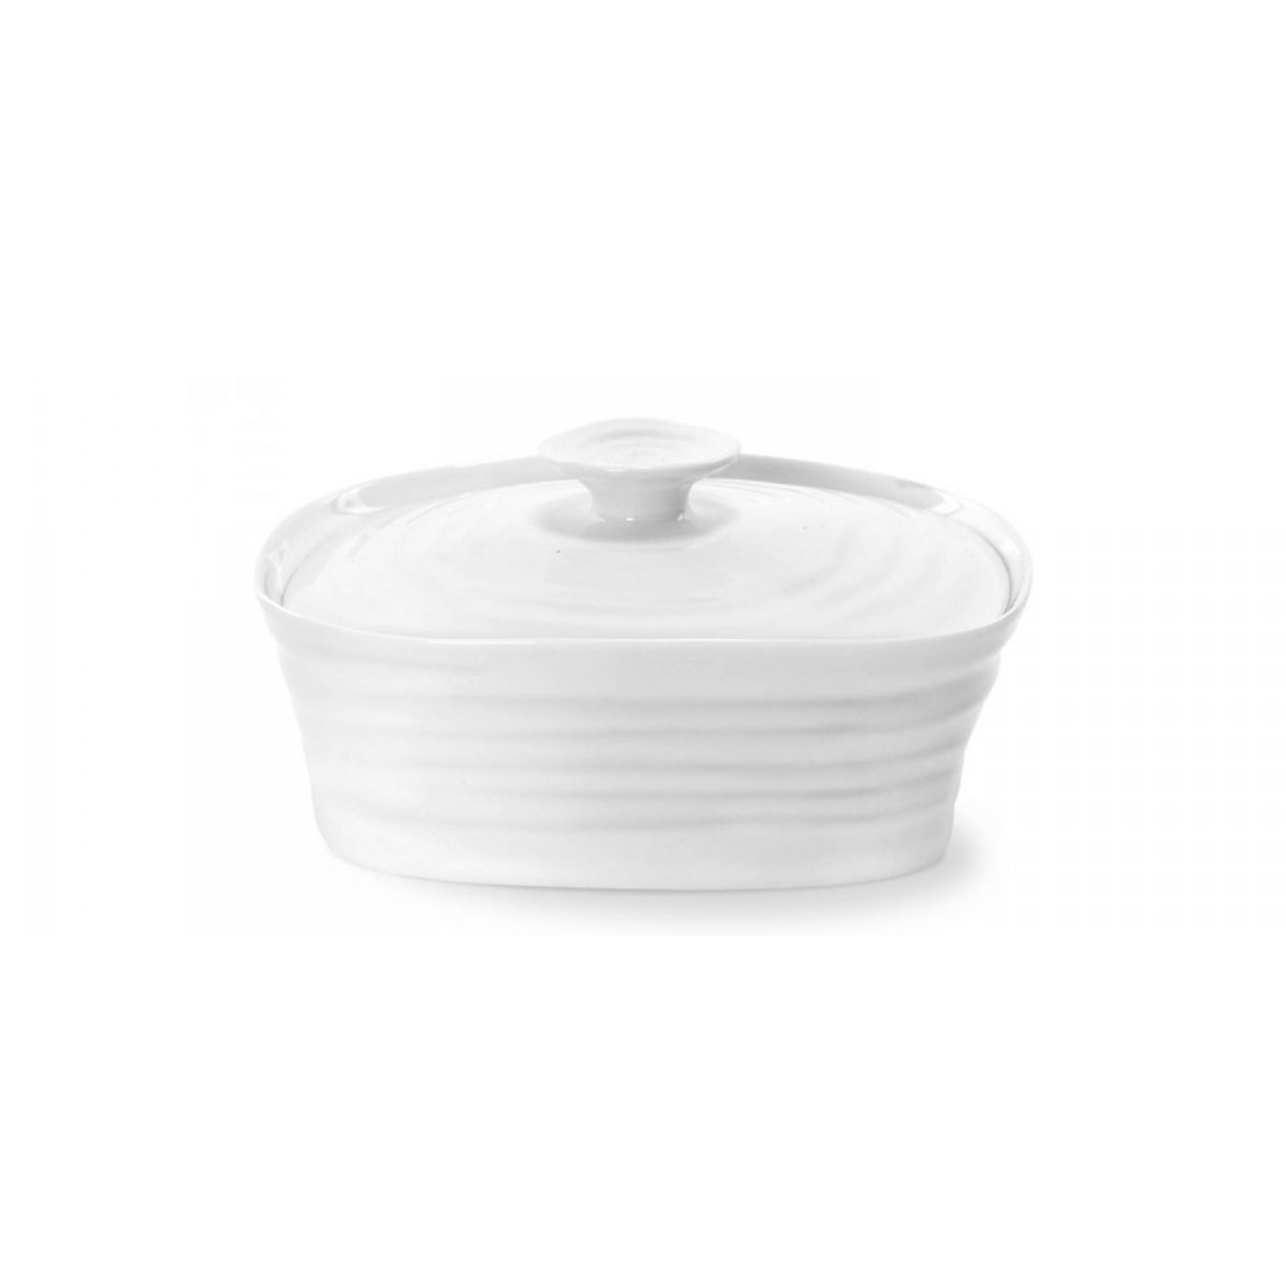 Covered Butter Dish By Sophie Conran